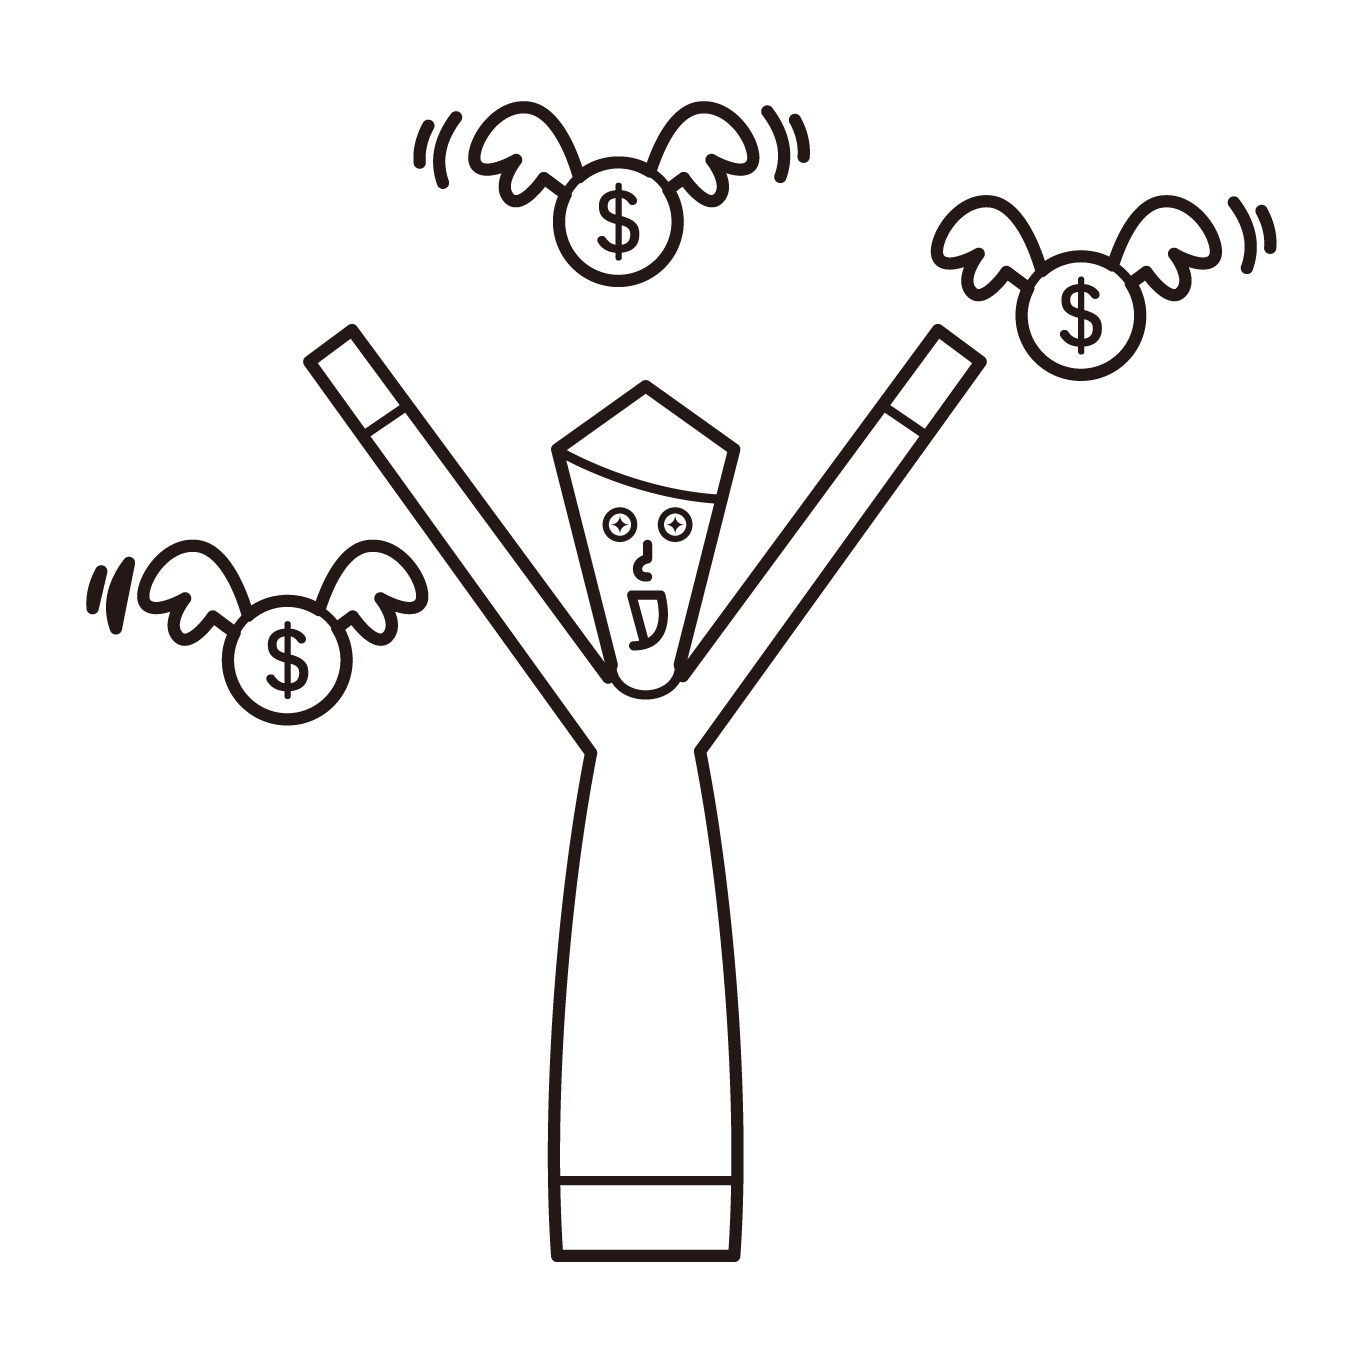 Illustration of a man who is happy to earn a special income